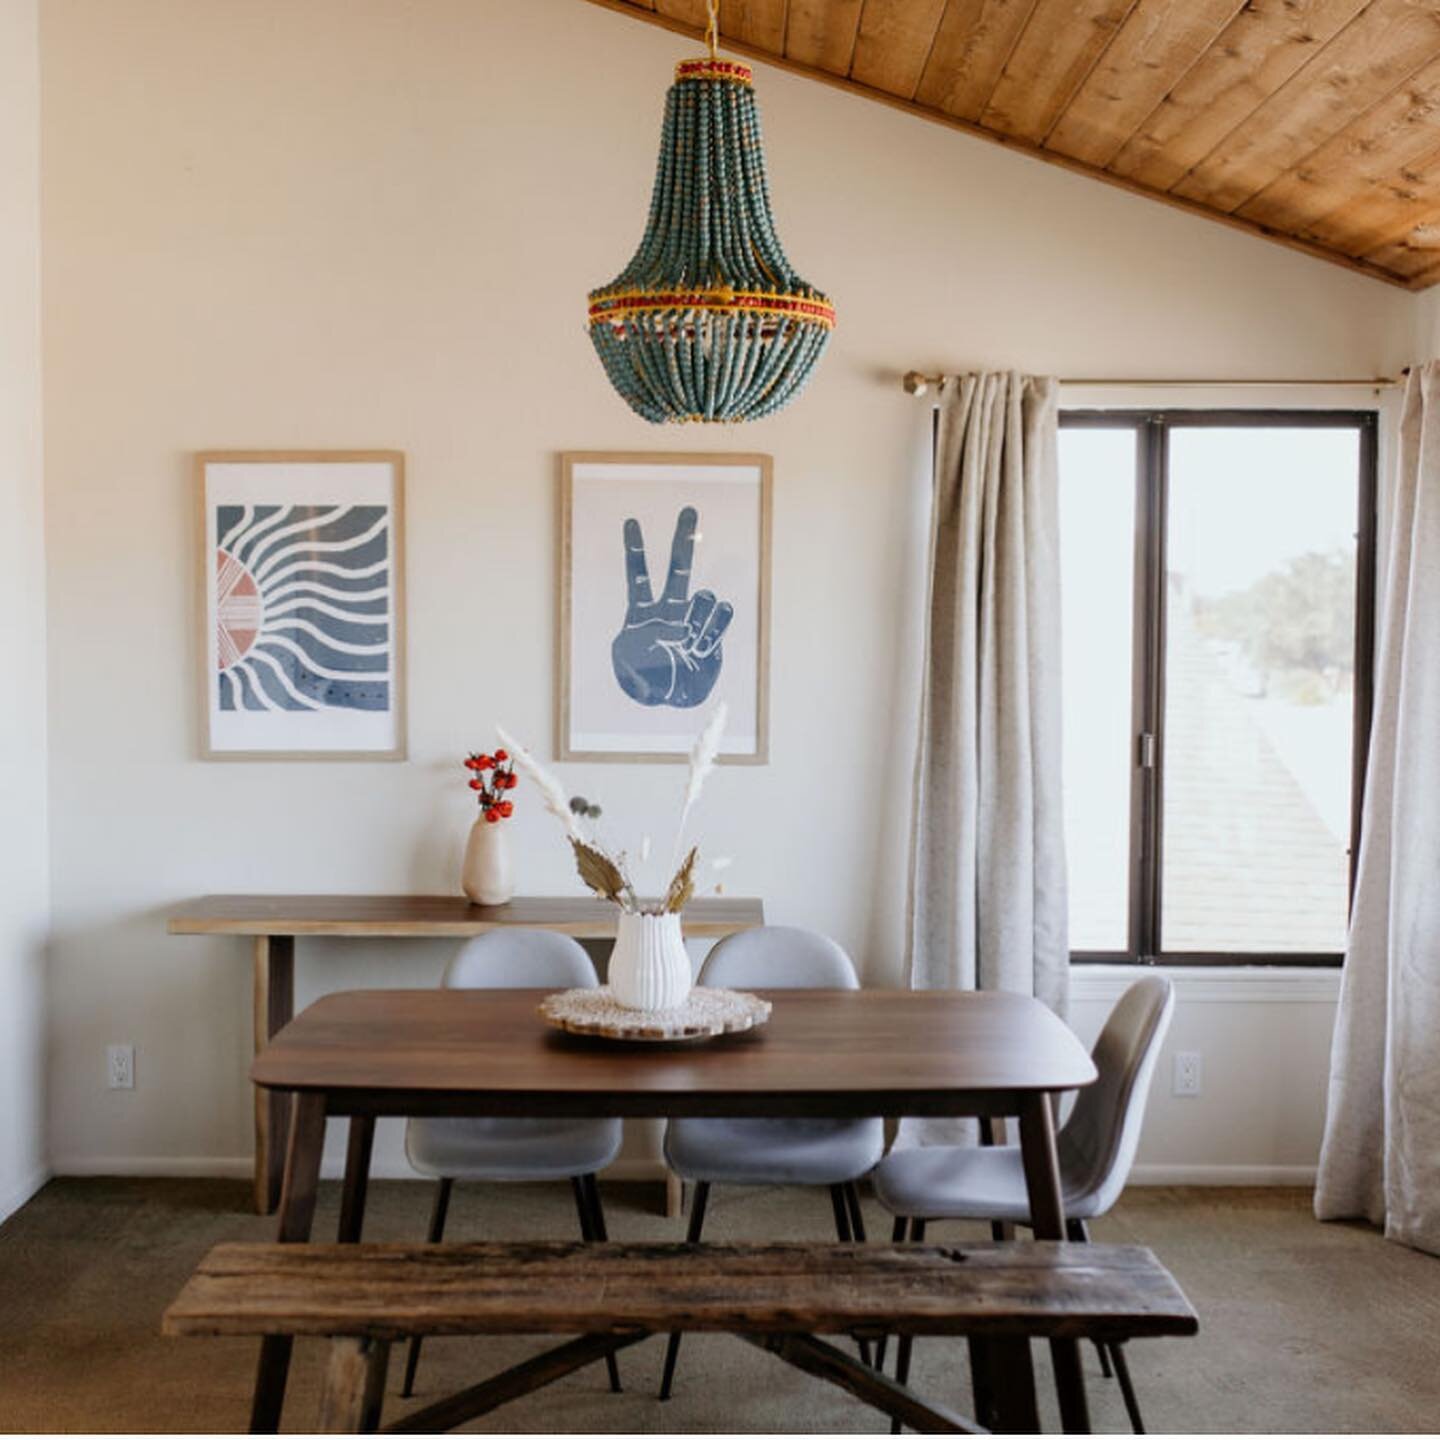 Manzanita House is now live! click the link in bio to book your Outstanding Stay! 
.
.
.
.
.
.
.
#beach #vacation #vacationrental #lososos #centralcoast #morrobay #airbnb #airbnbsuperhost #travel #wanderlust